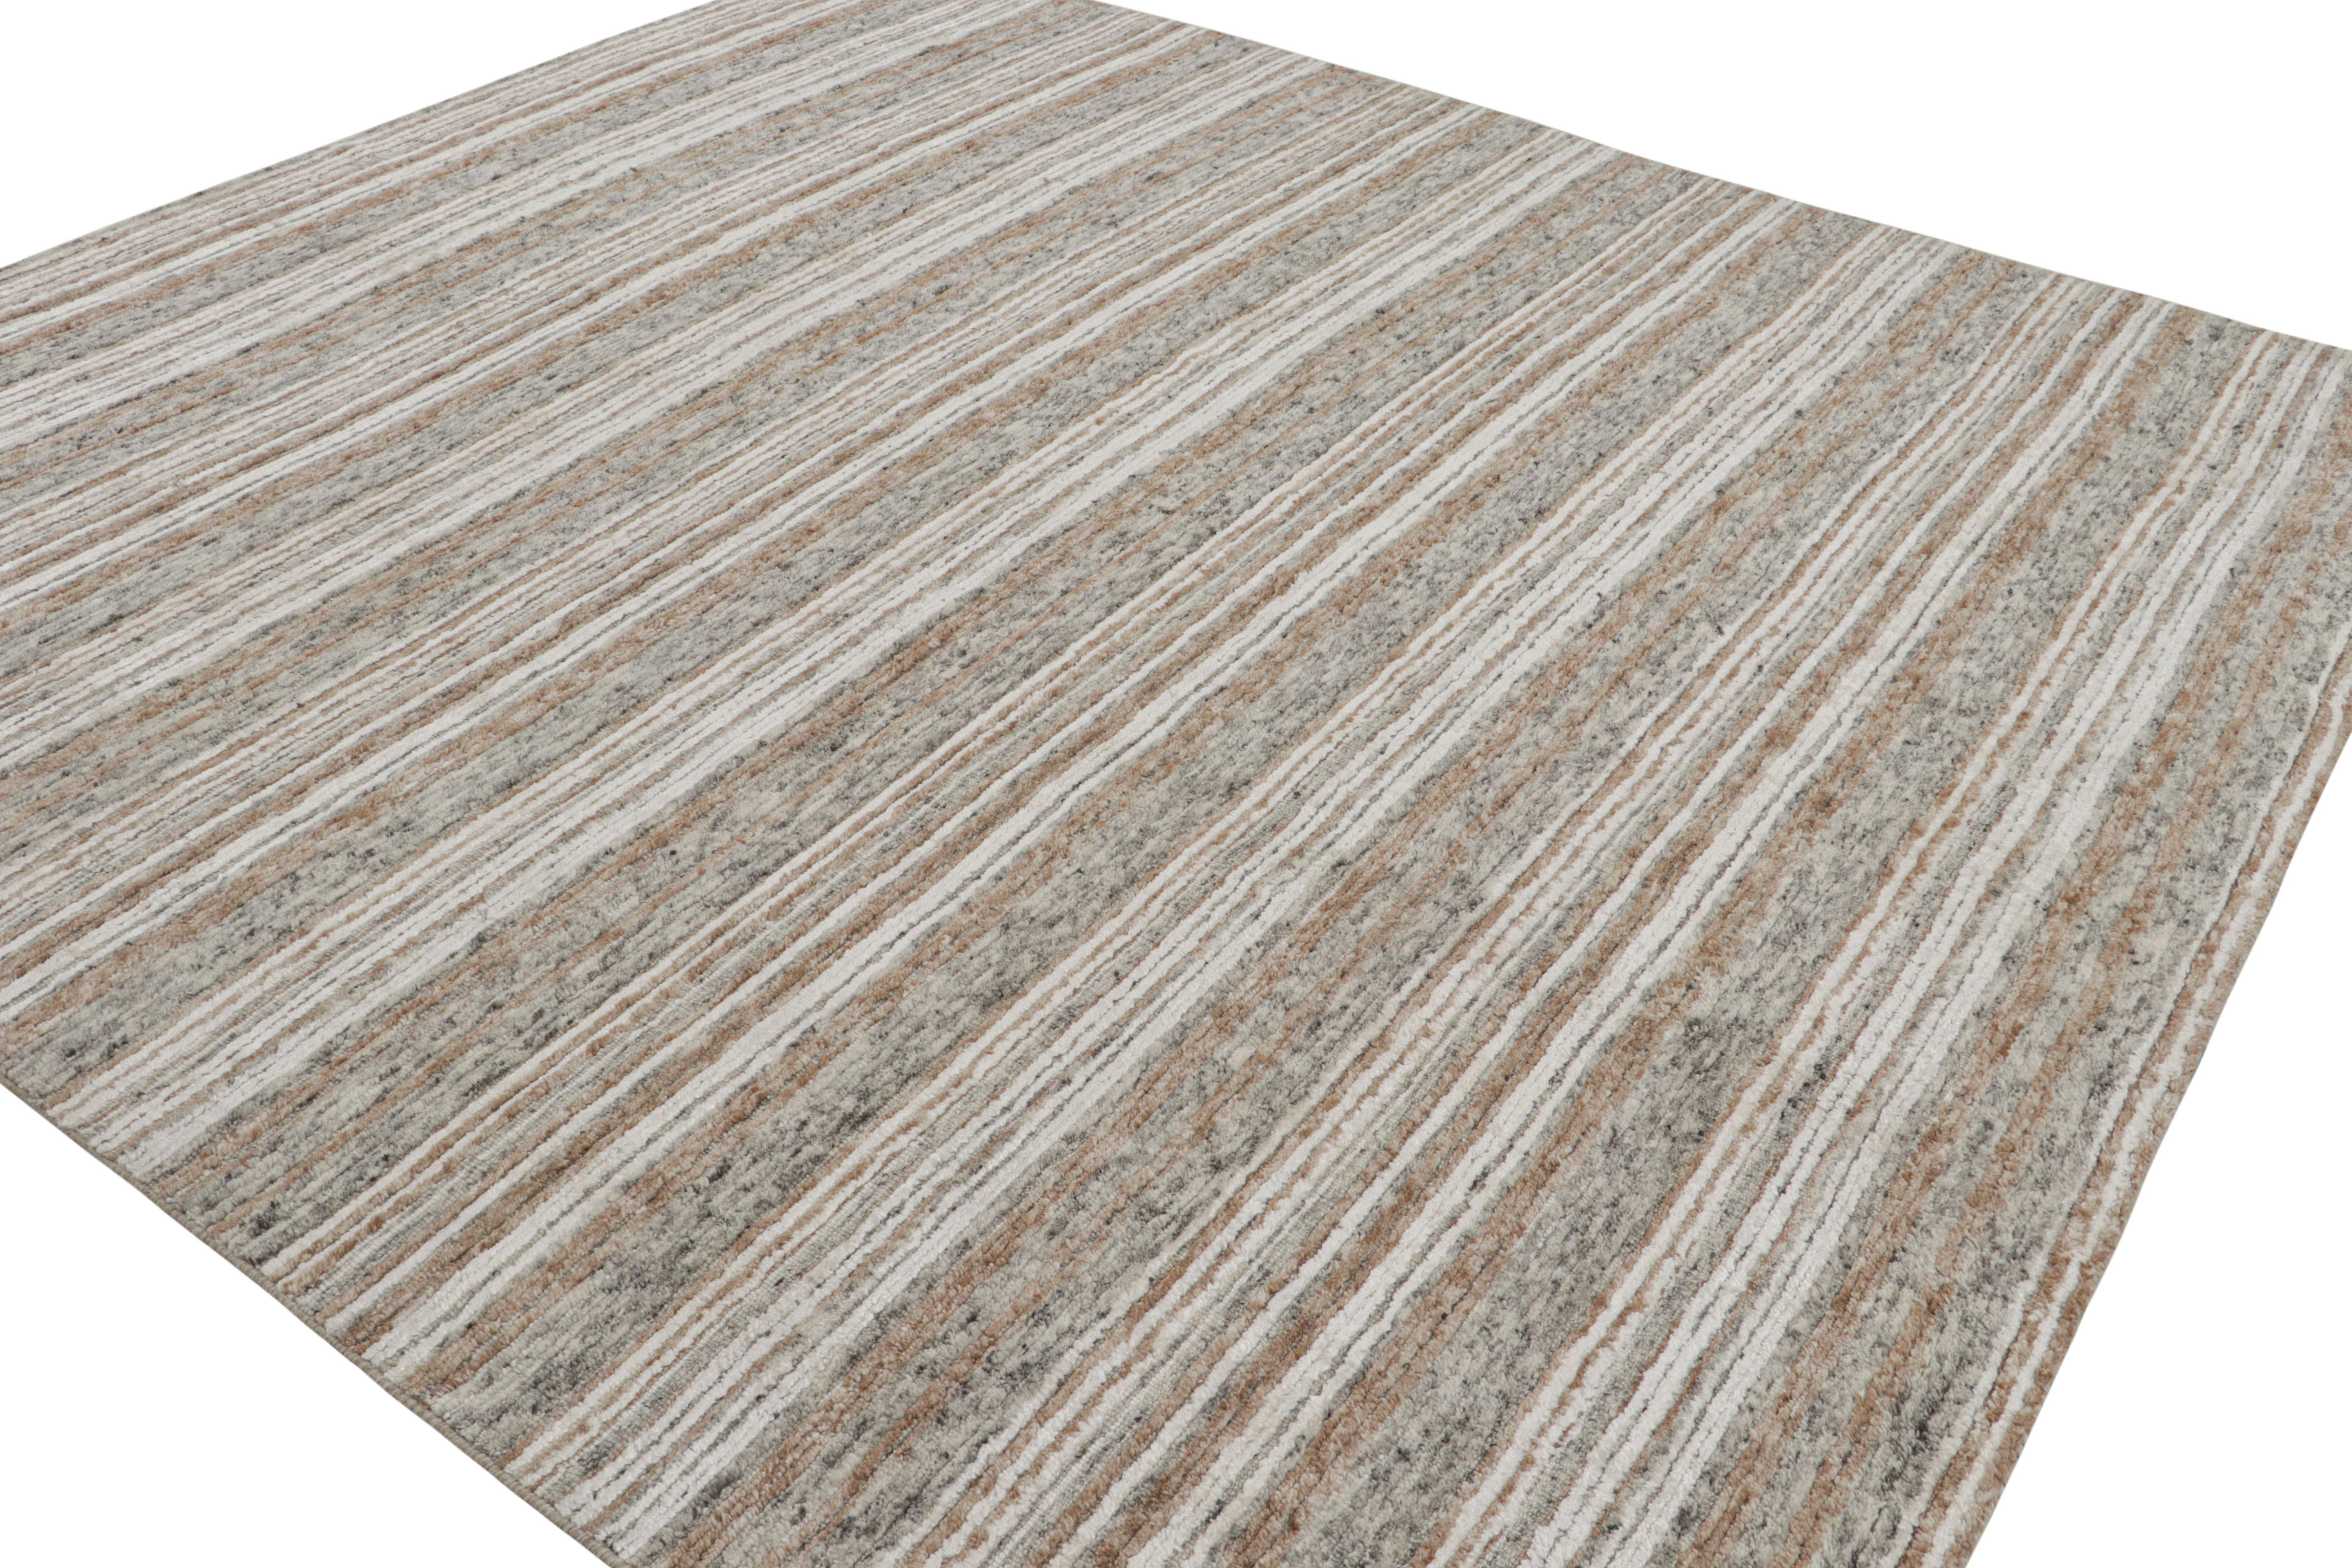 Made with wool and art silk, this 9x10 modern textural rug with geometric patterns features beige-brown, gray and white hues underscore a series of stripes in the all over style.  

On the Design: 

This contemporary design is an homage to art via